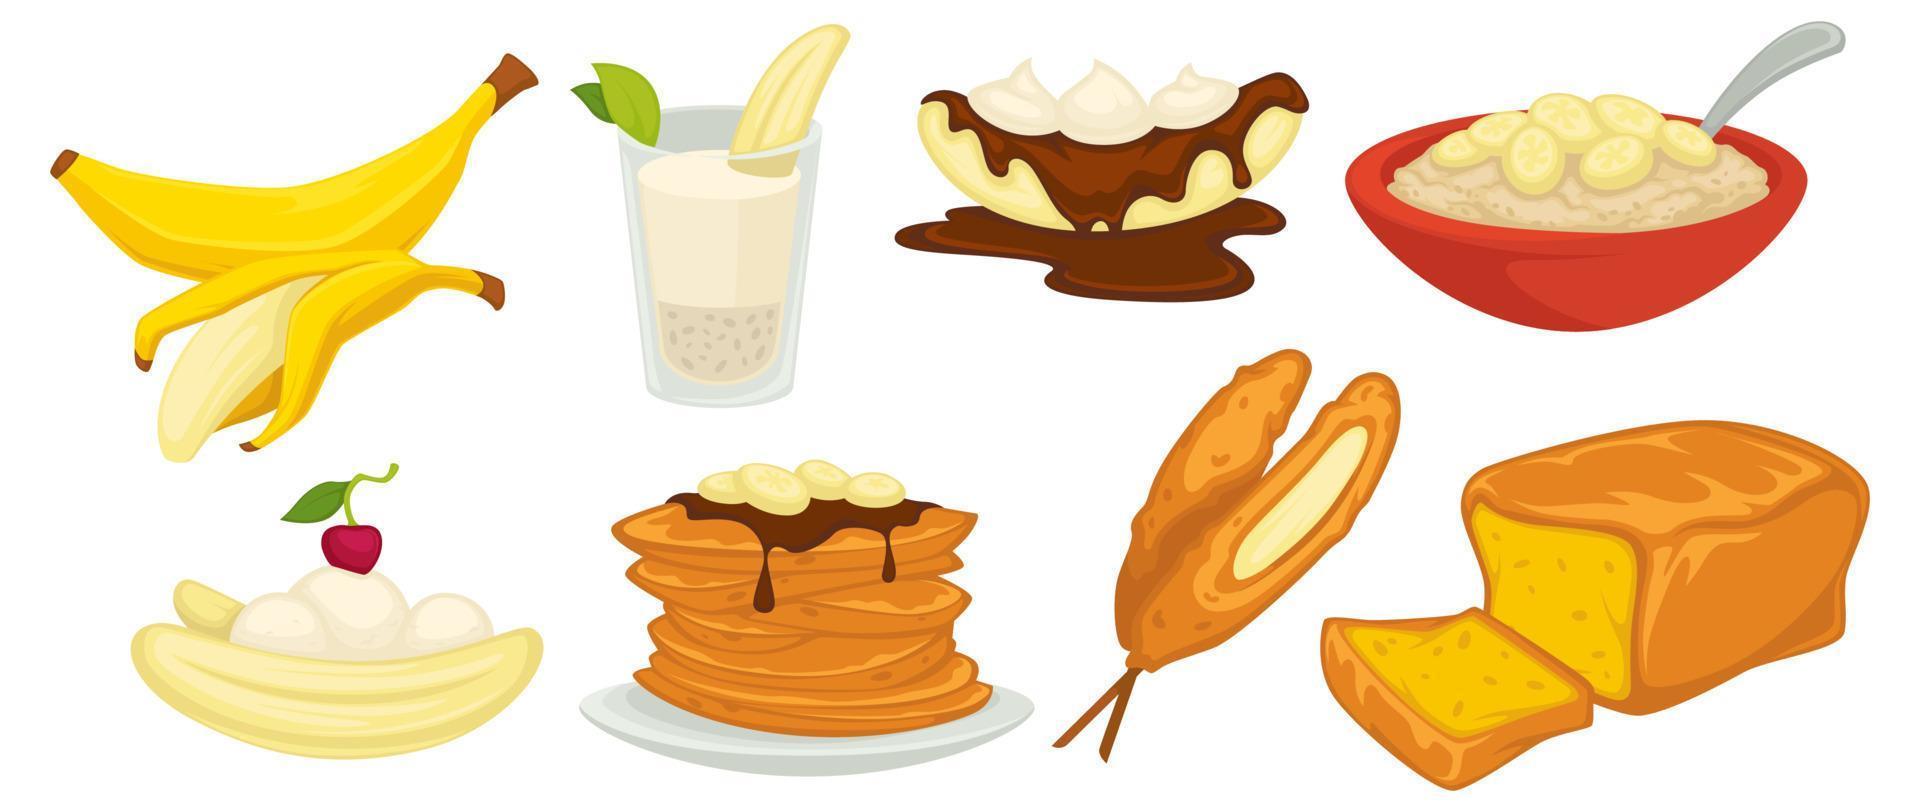 Banana desserts and sweets, bread and porrisge vector